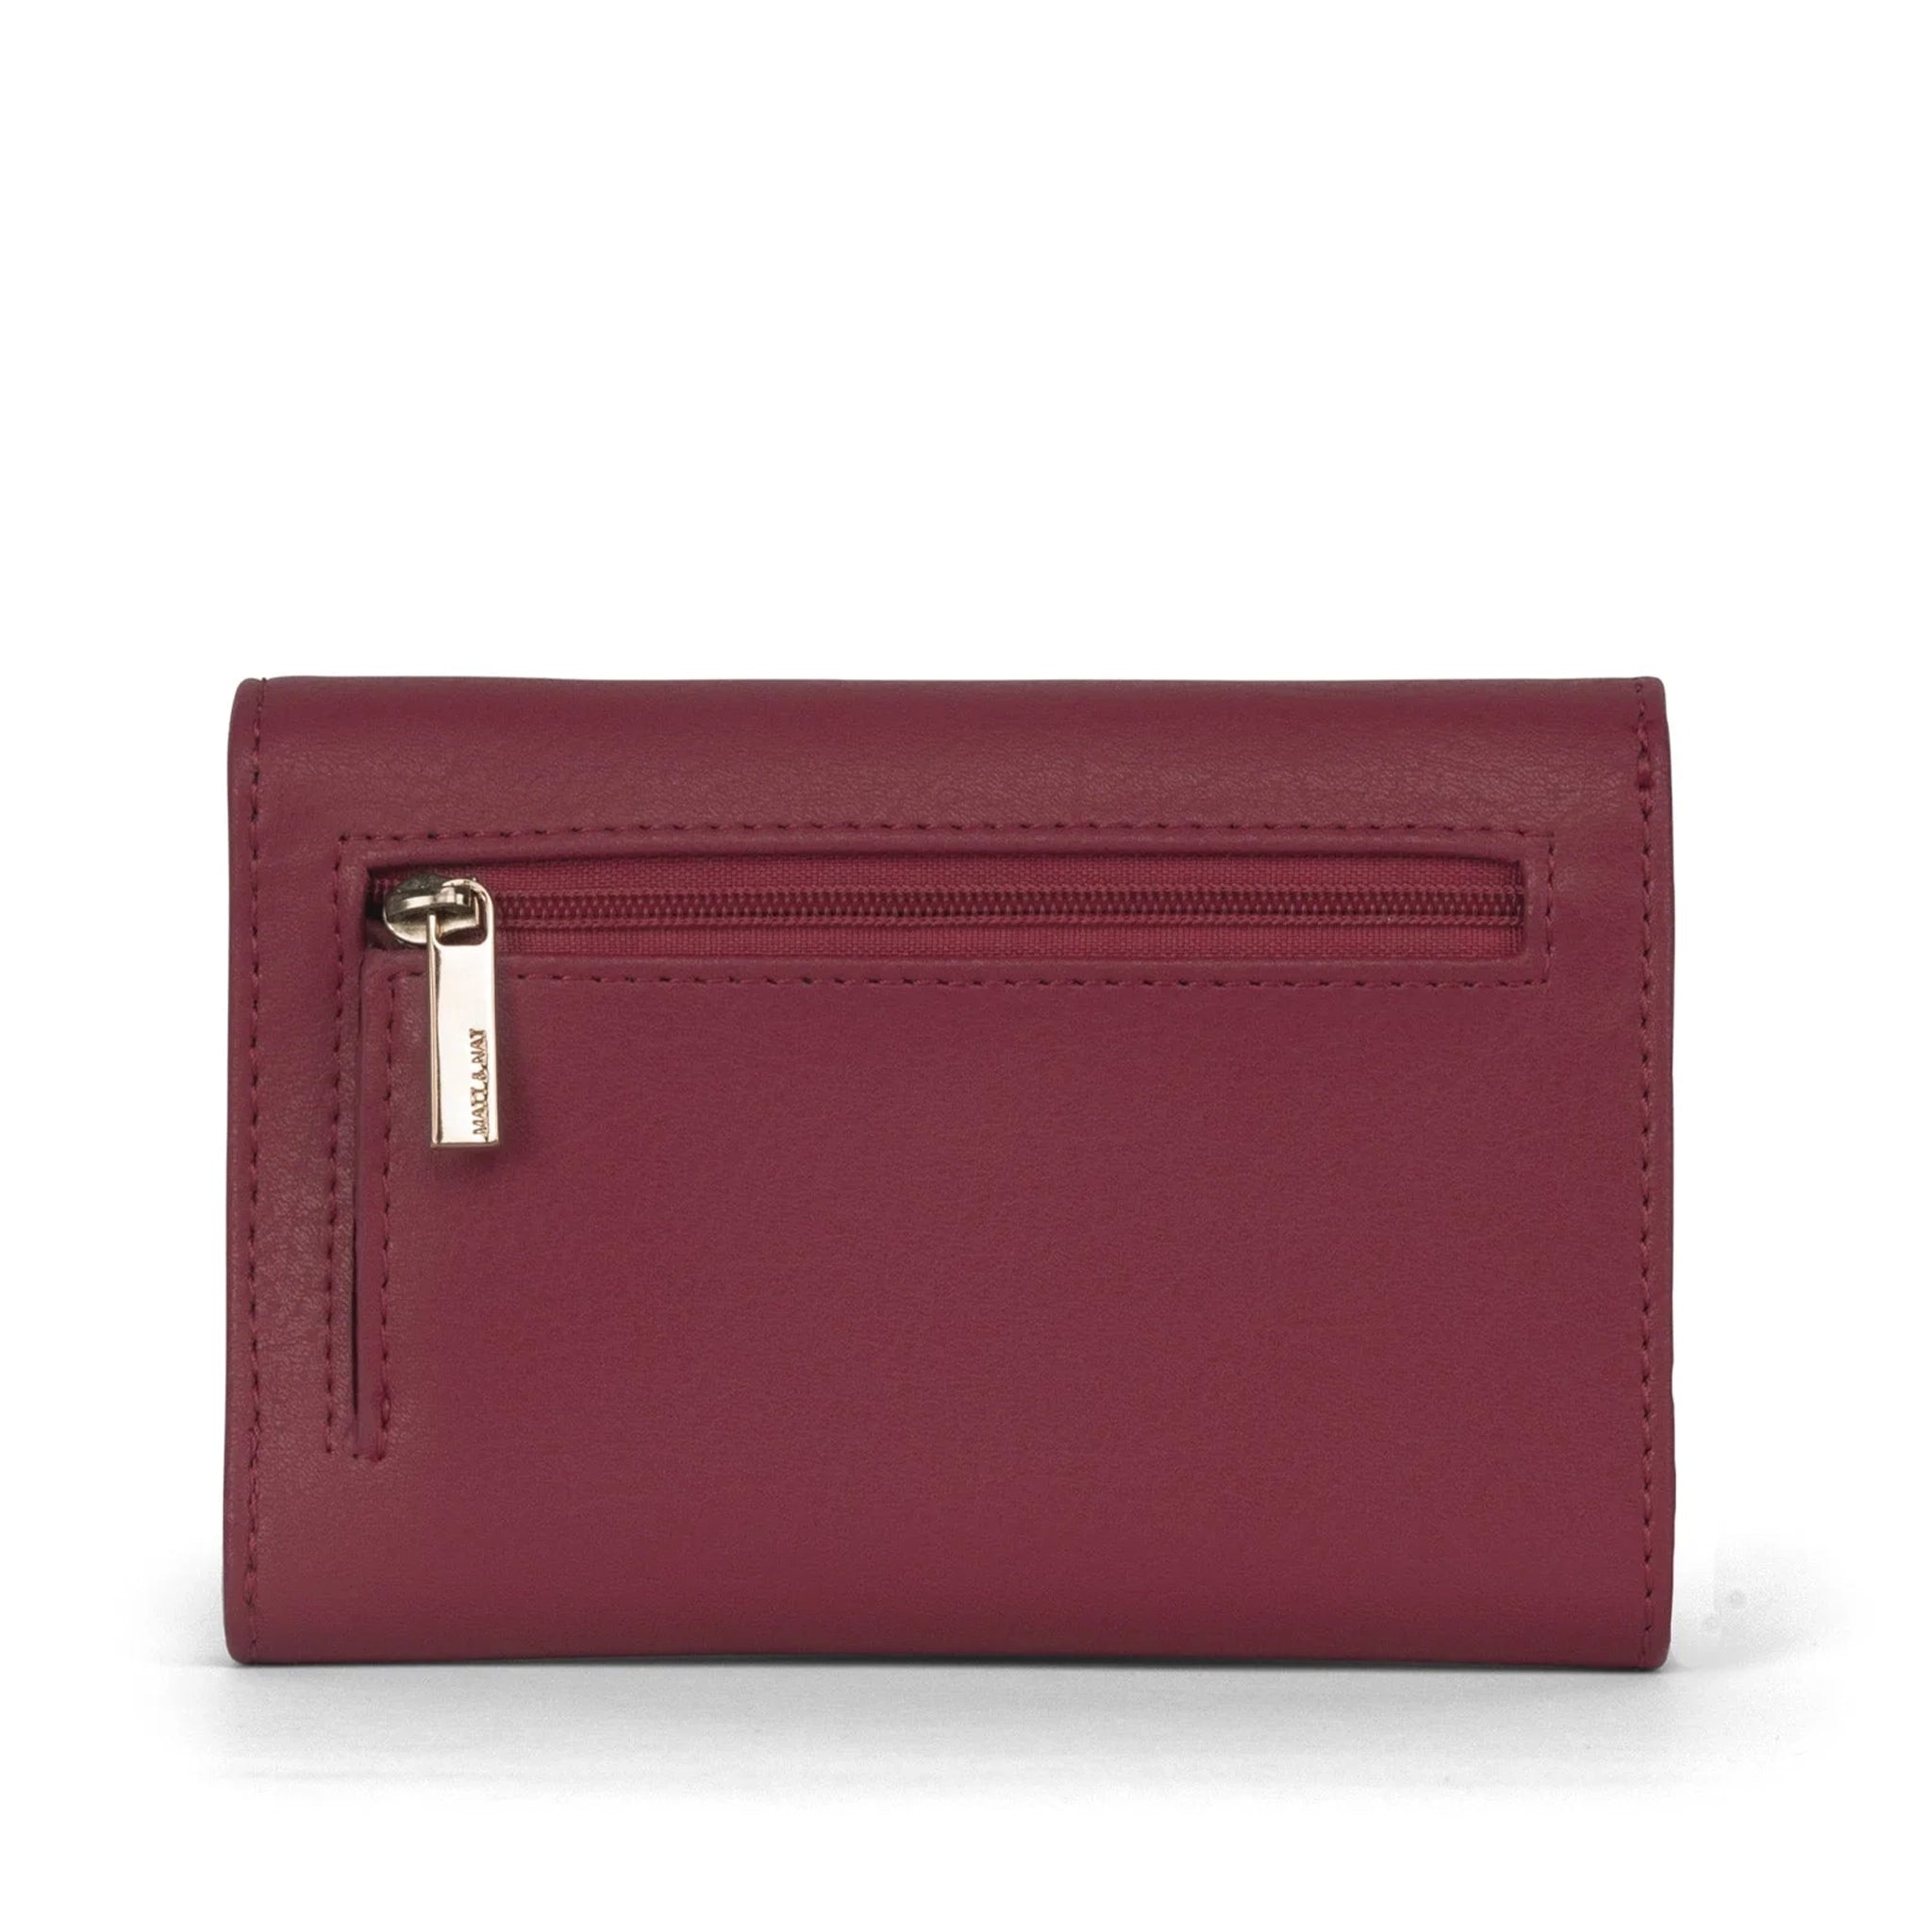 On a white background is a dark cherry red wallet with a back zipper for coins.